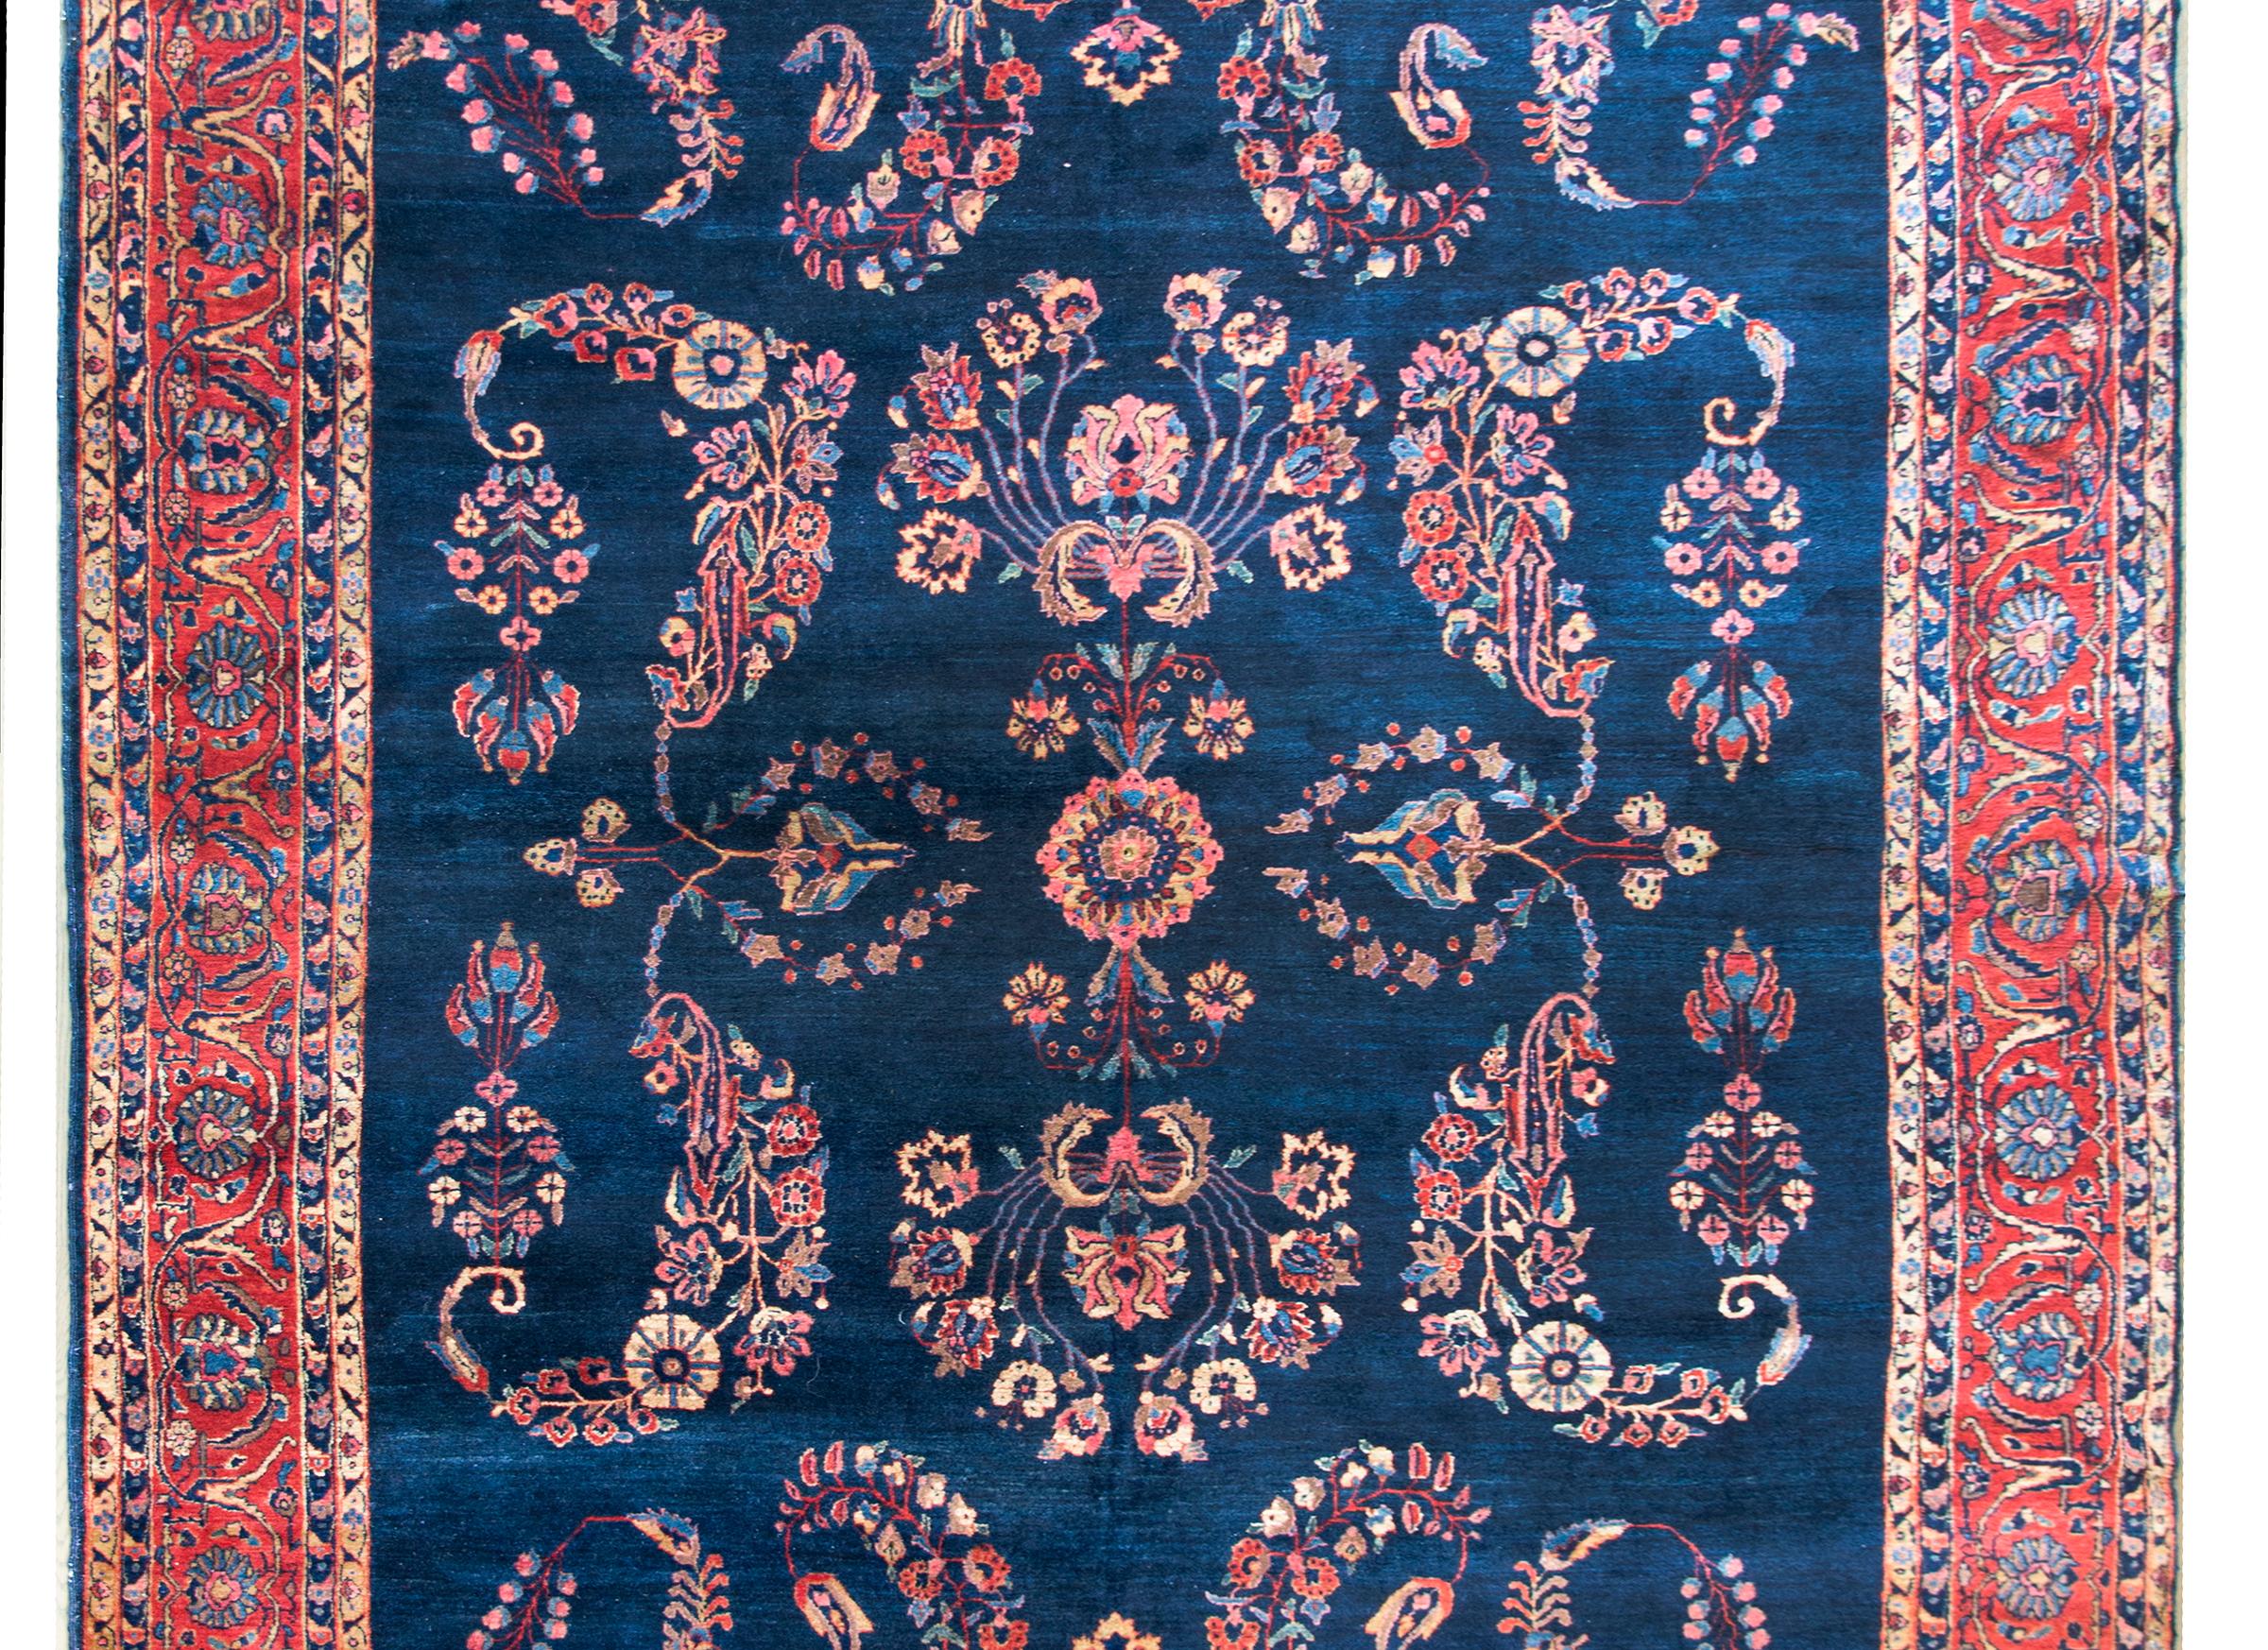 A wonderful early 20th century Persian Sarouk Mohajeran rug with a large-scale mirror floral pattern woven in traditional Farouk colors including crimson, pink, cream, and light and dark indigo, and surrounded by a wide floral patterned border